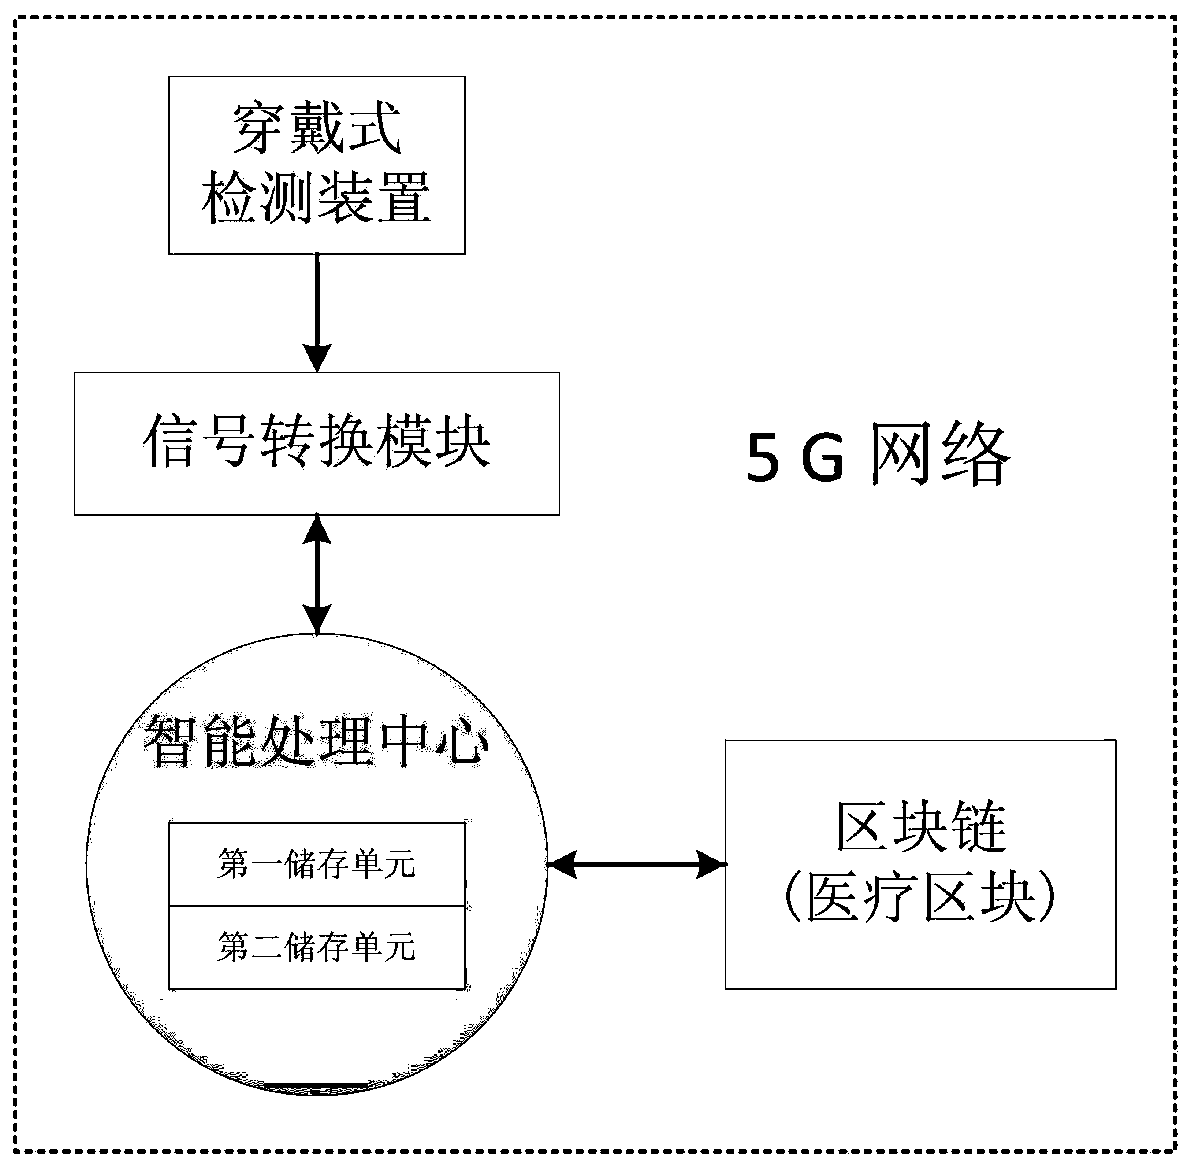 Comprehensive-health AI prevention and management system and method based on 5G and block chain